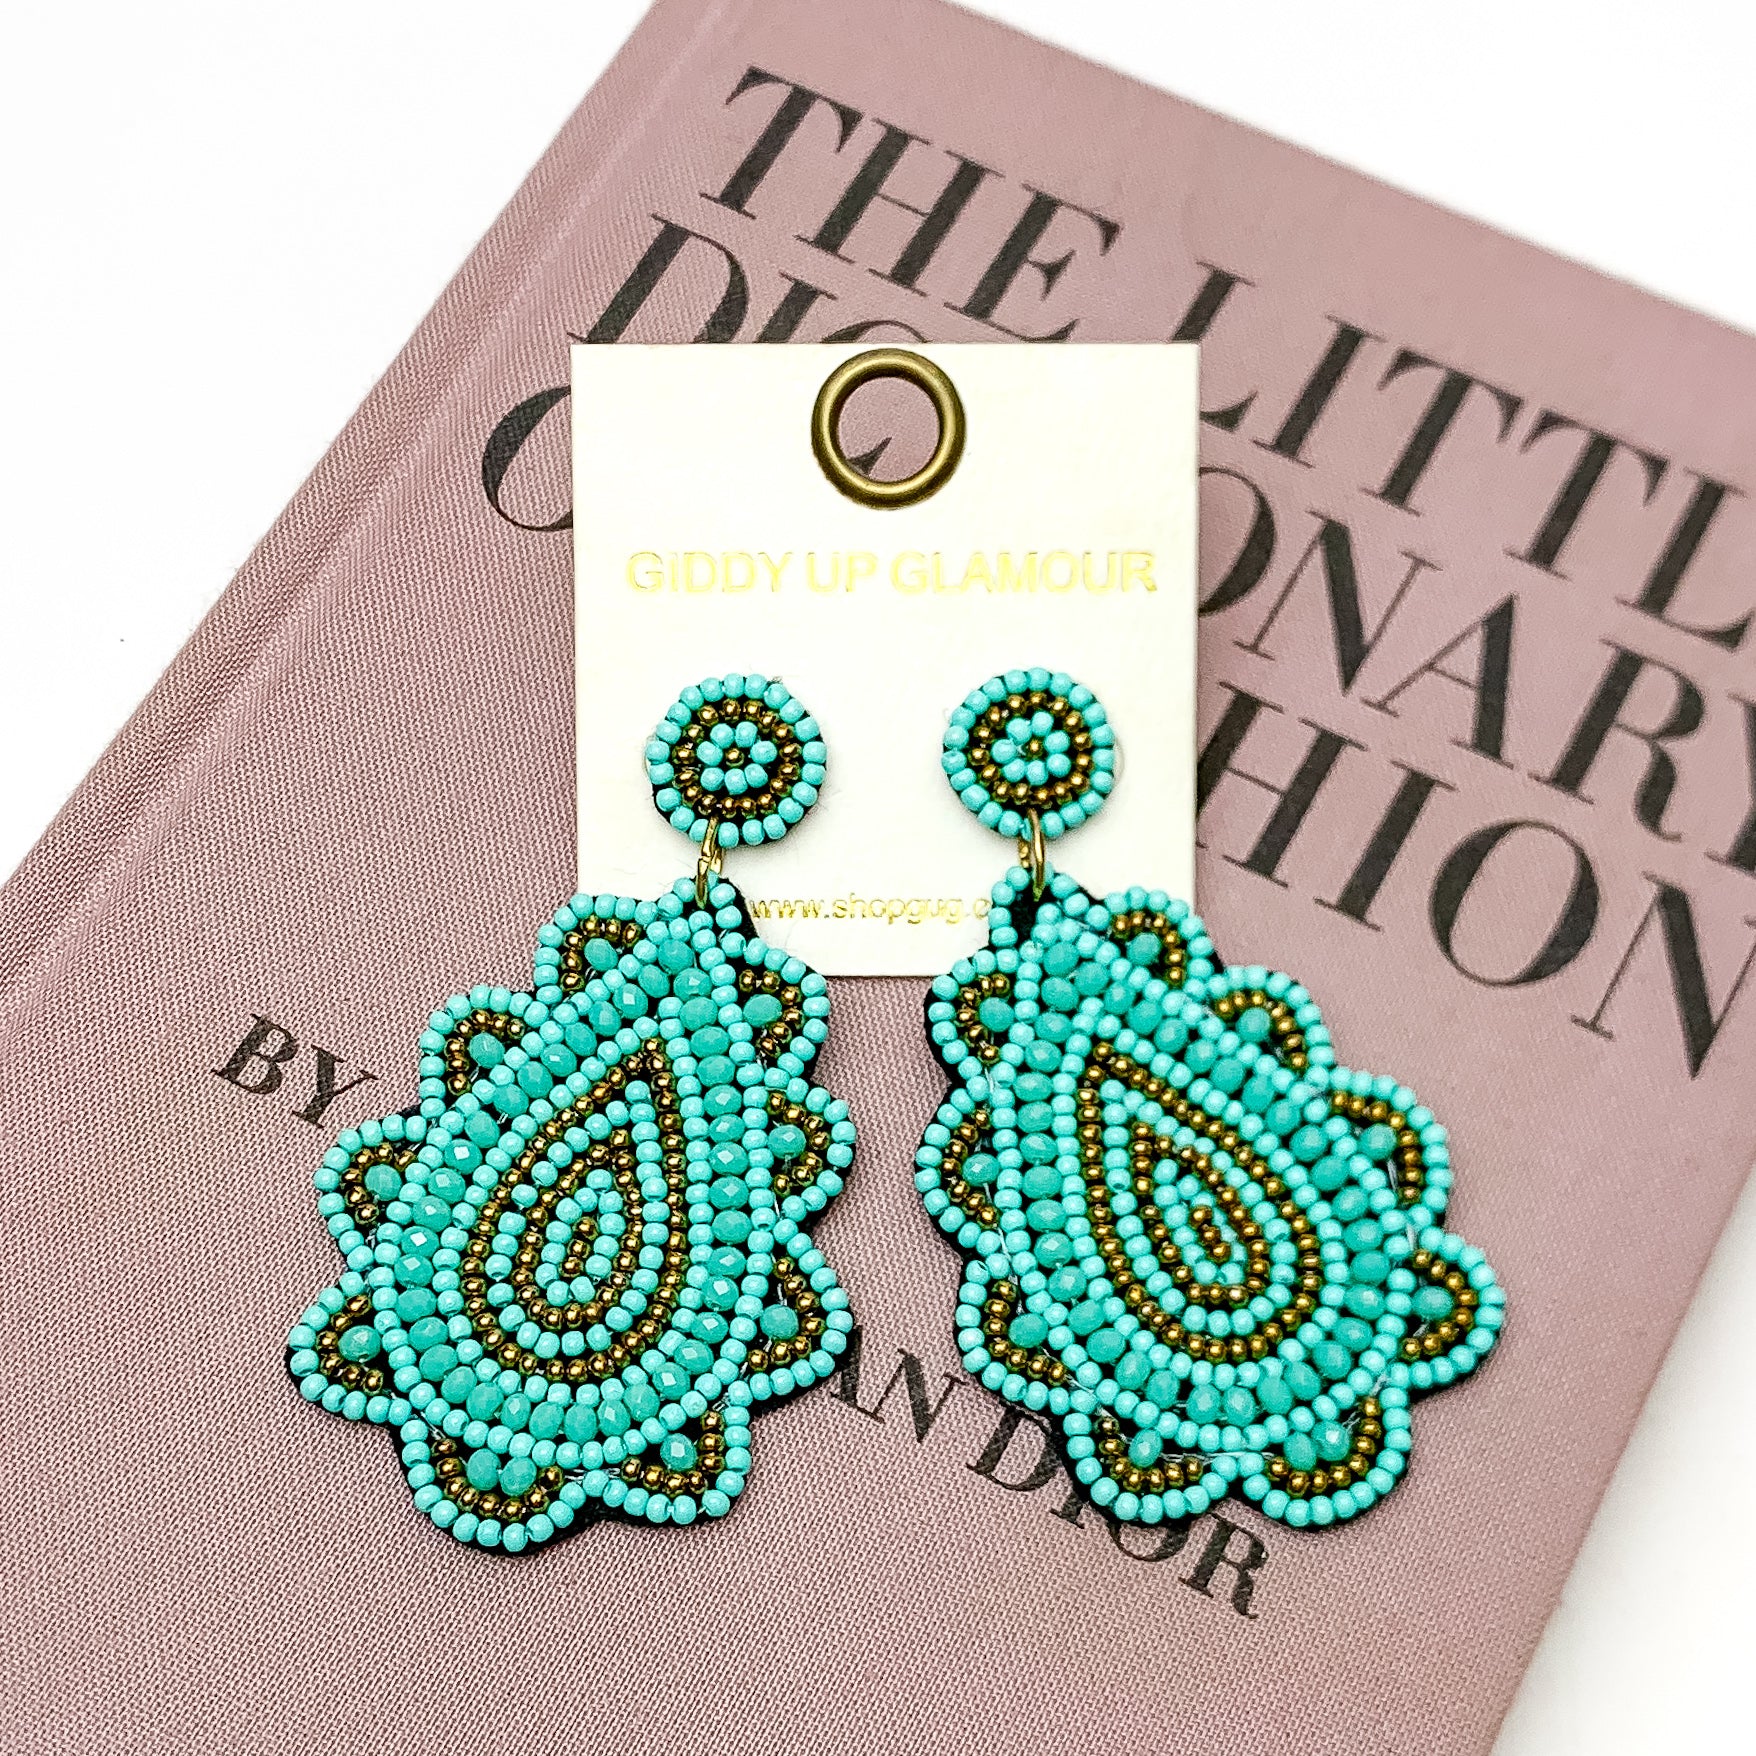 Light Up The Night Seed Bead Teardrop Earrings in Turquoise Blue - Giddy Up Glamour Boutique